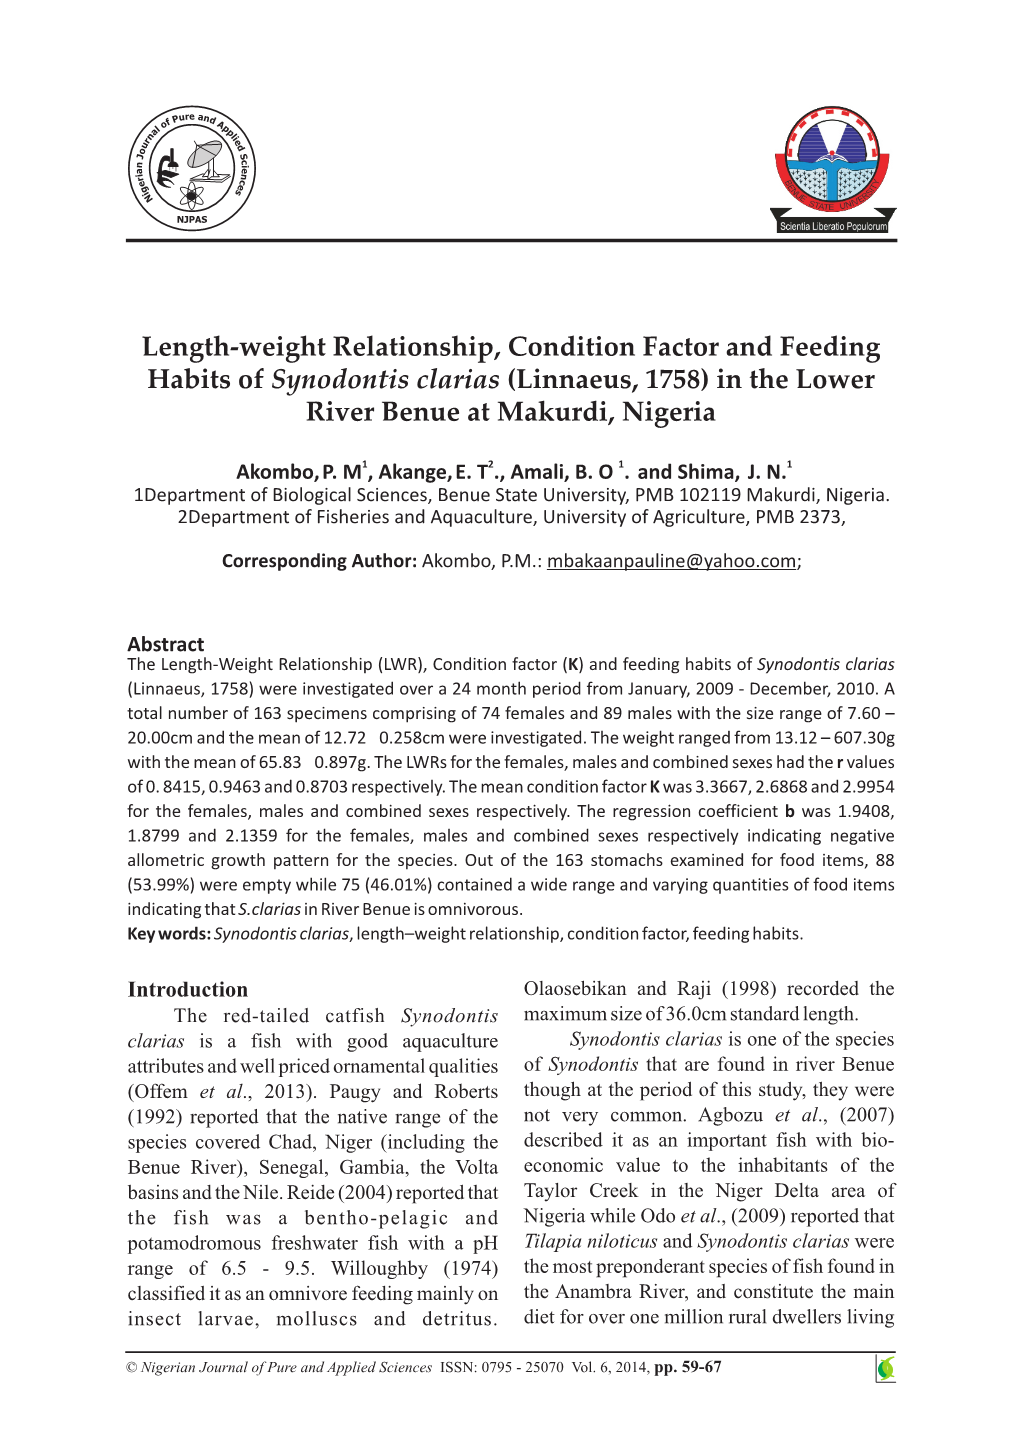 Length-Weight Relationship, Condition Factor and Feeding Habits of Synodontis Clarias (Linnaeus, 1758) in the Lower River Benue at Makurdi, Nigeria